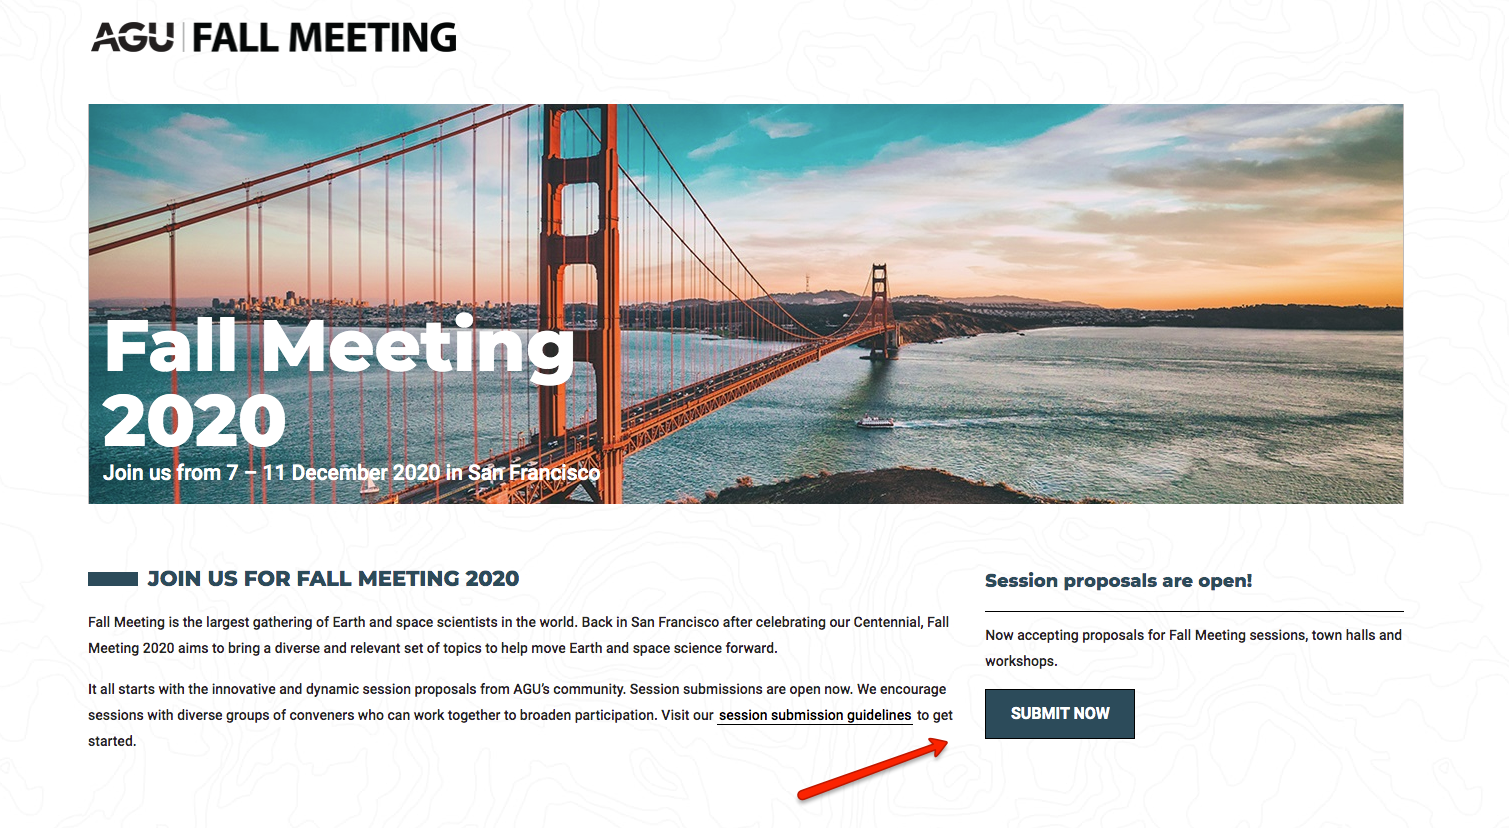 An example of conference website design in action on the AGU site